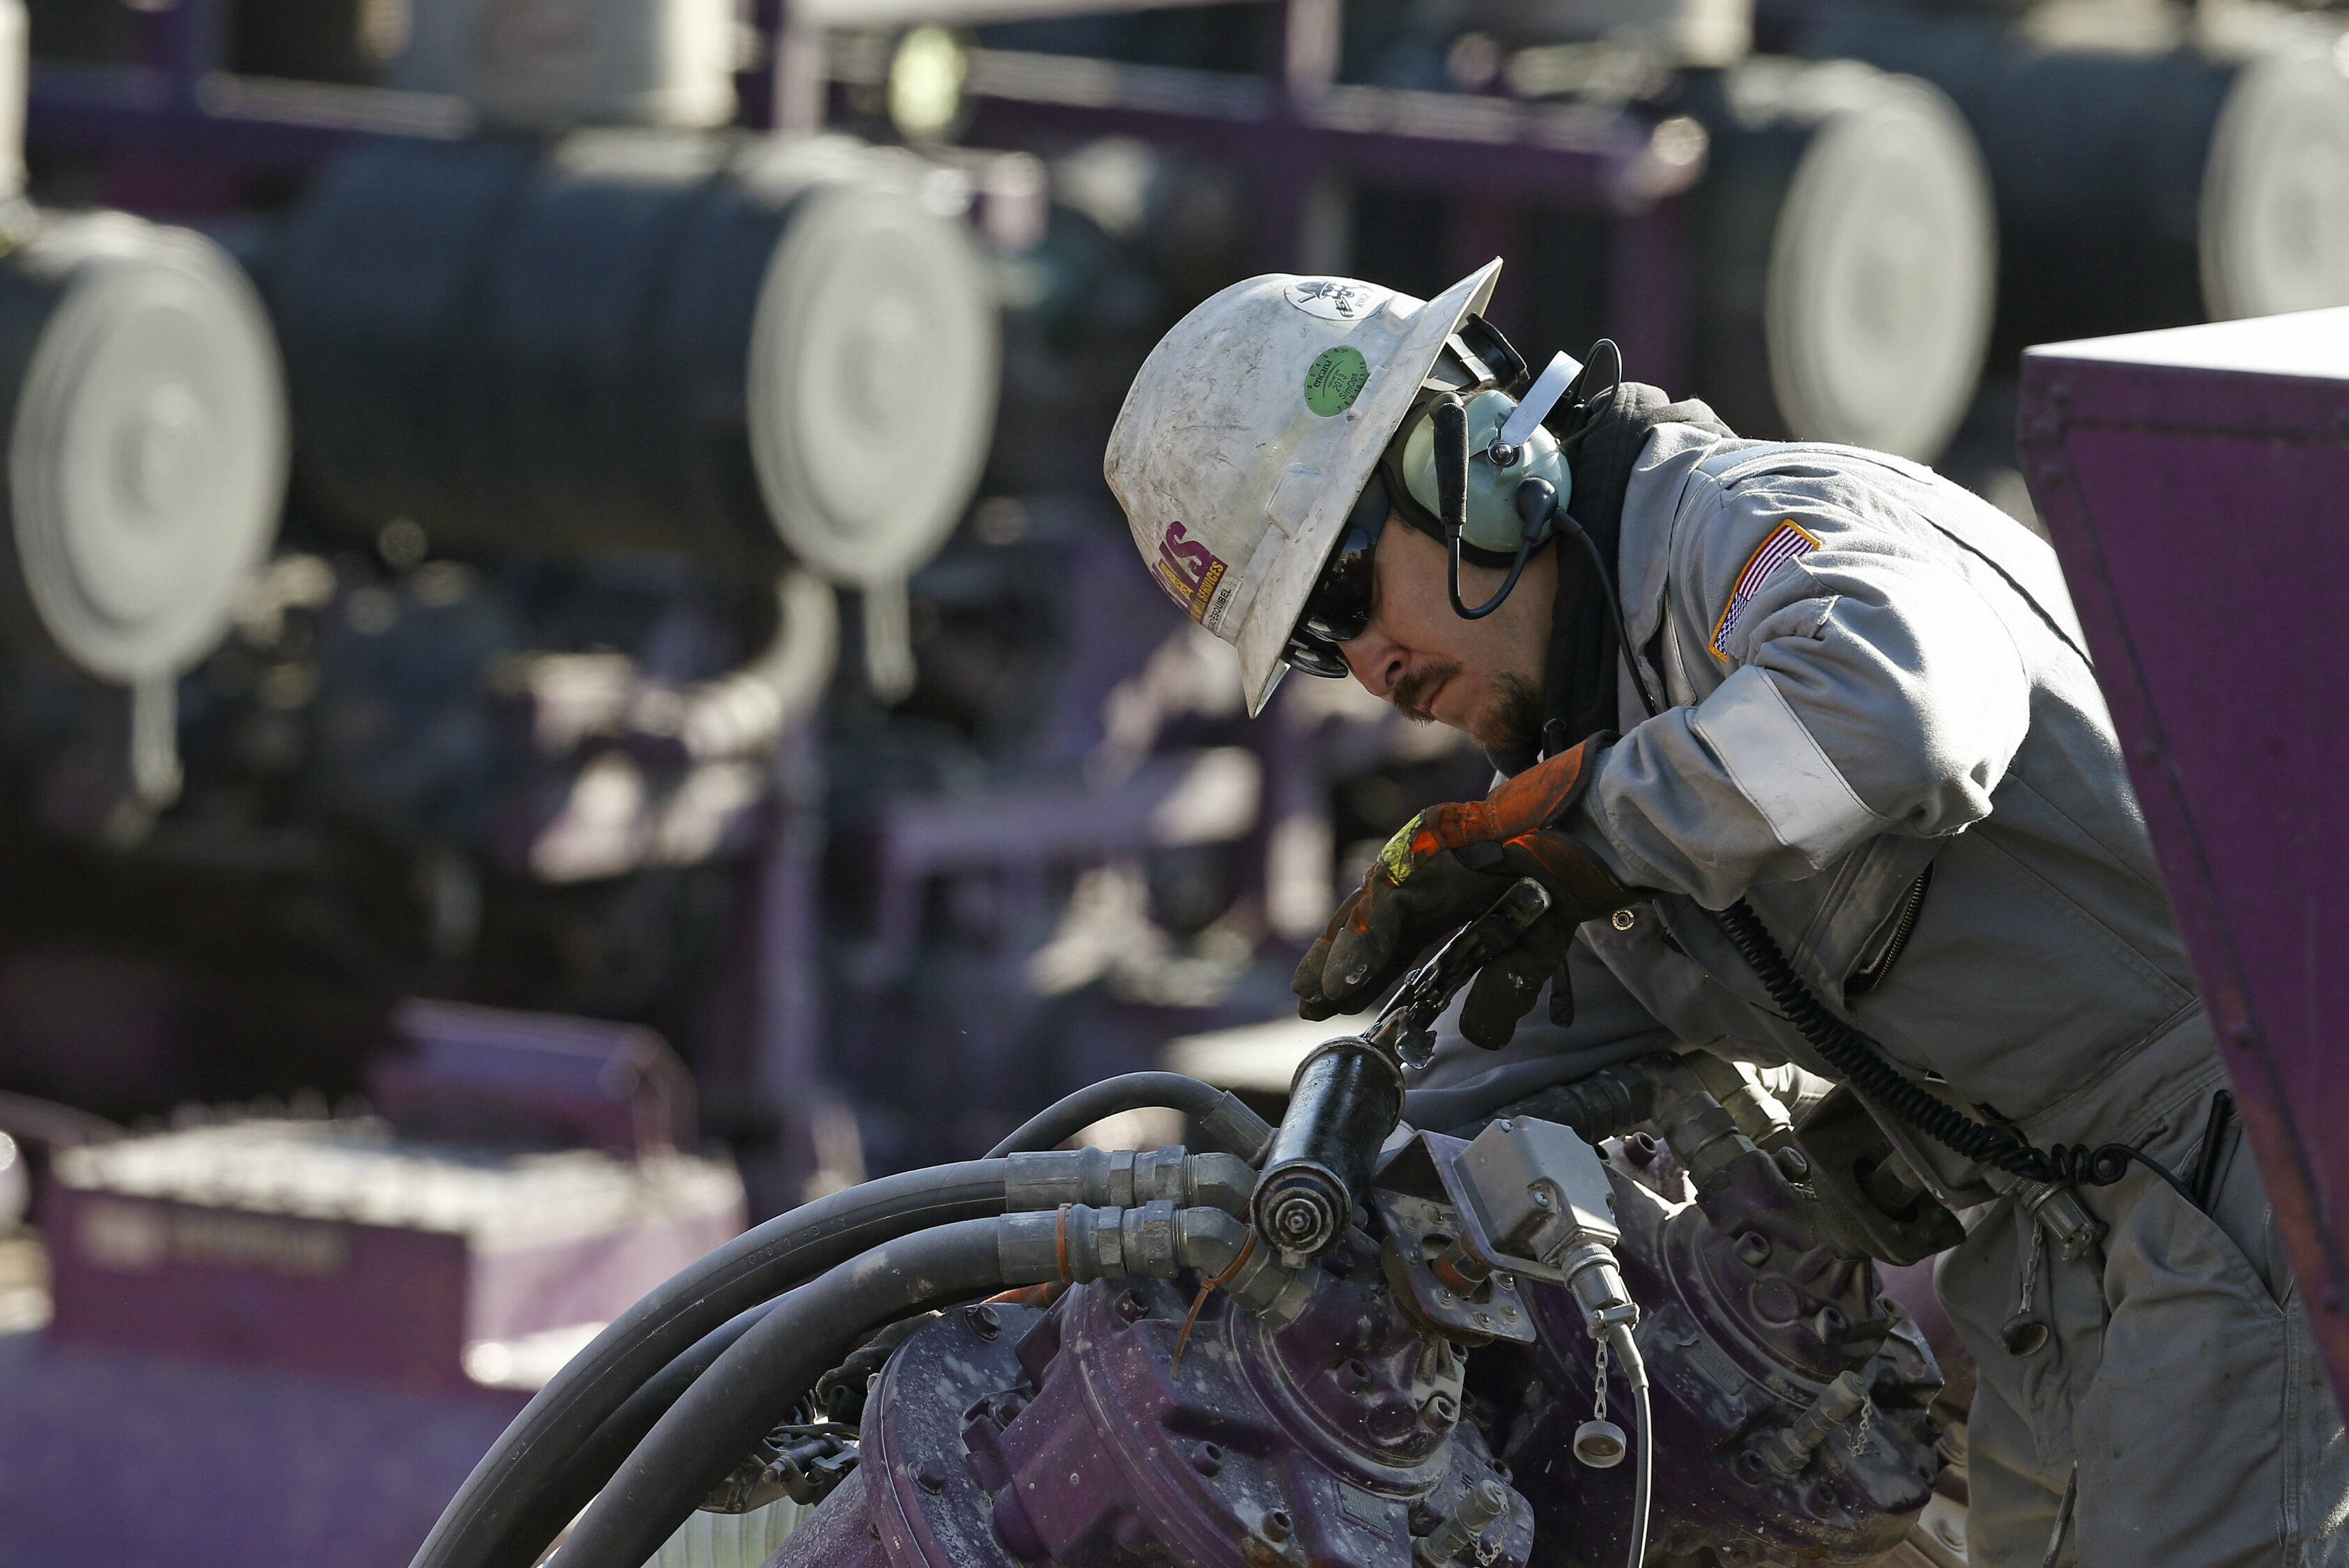 In this March 25, 2014 photo, a worker oils a pump during a hydraulic fracturing operation at an Encana Corp. well pad near Mead, Colo. The National Petroleum Council estimates that up to 80 percent of natural oil wells drilled in the next decade will require hydraulic fracturing.